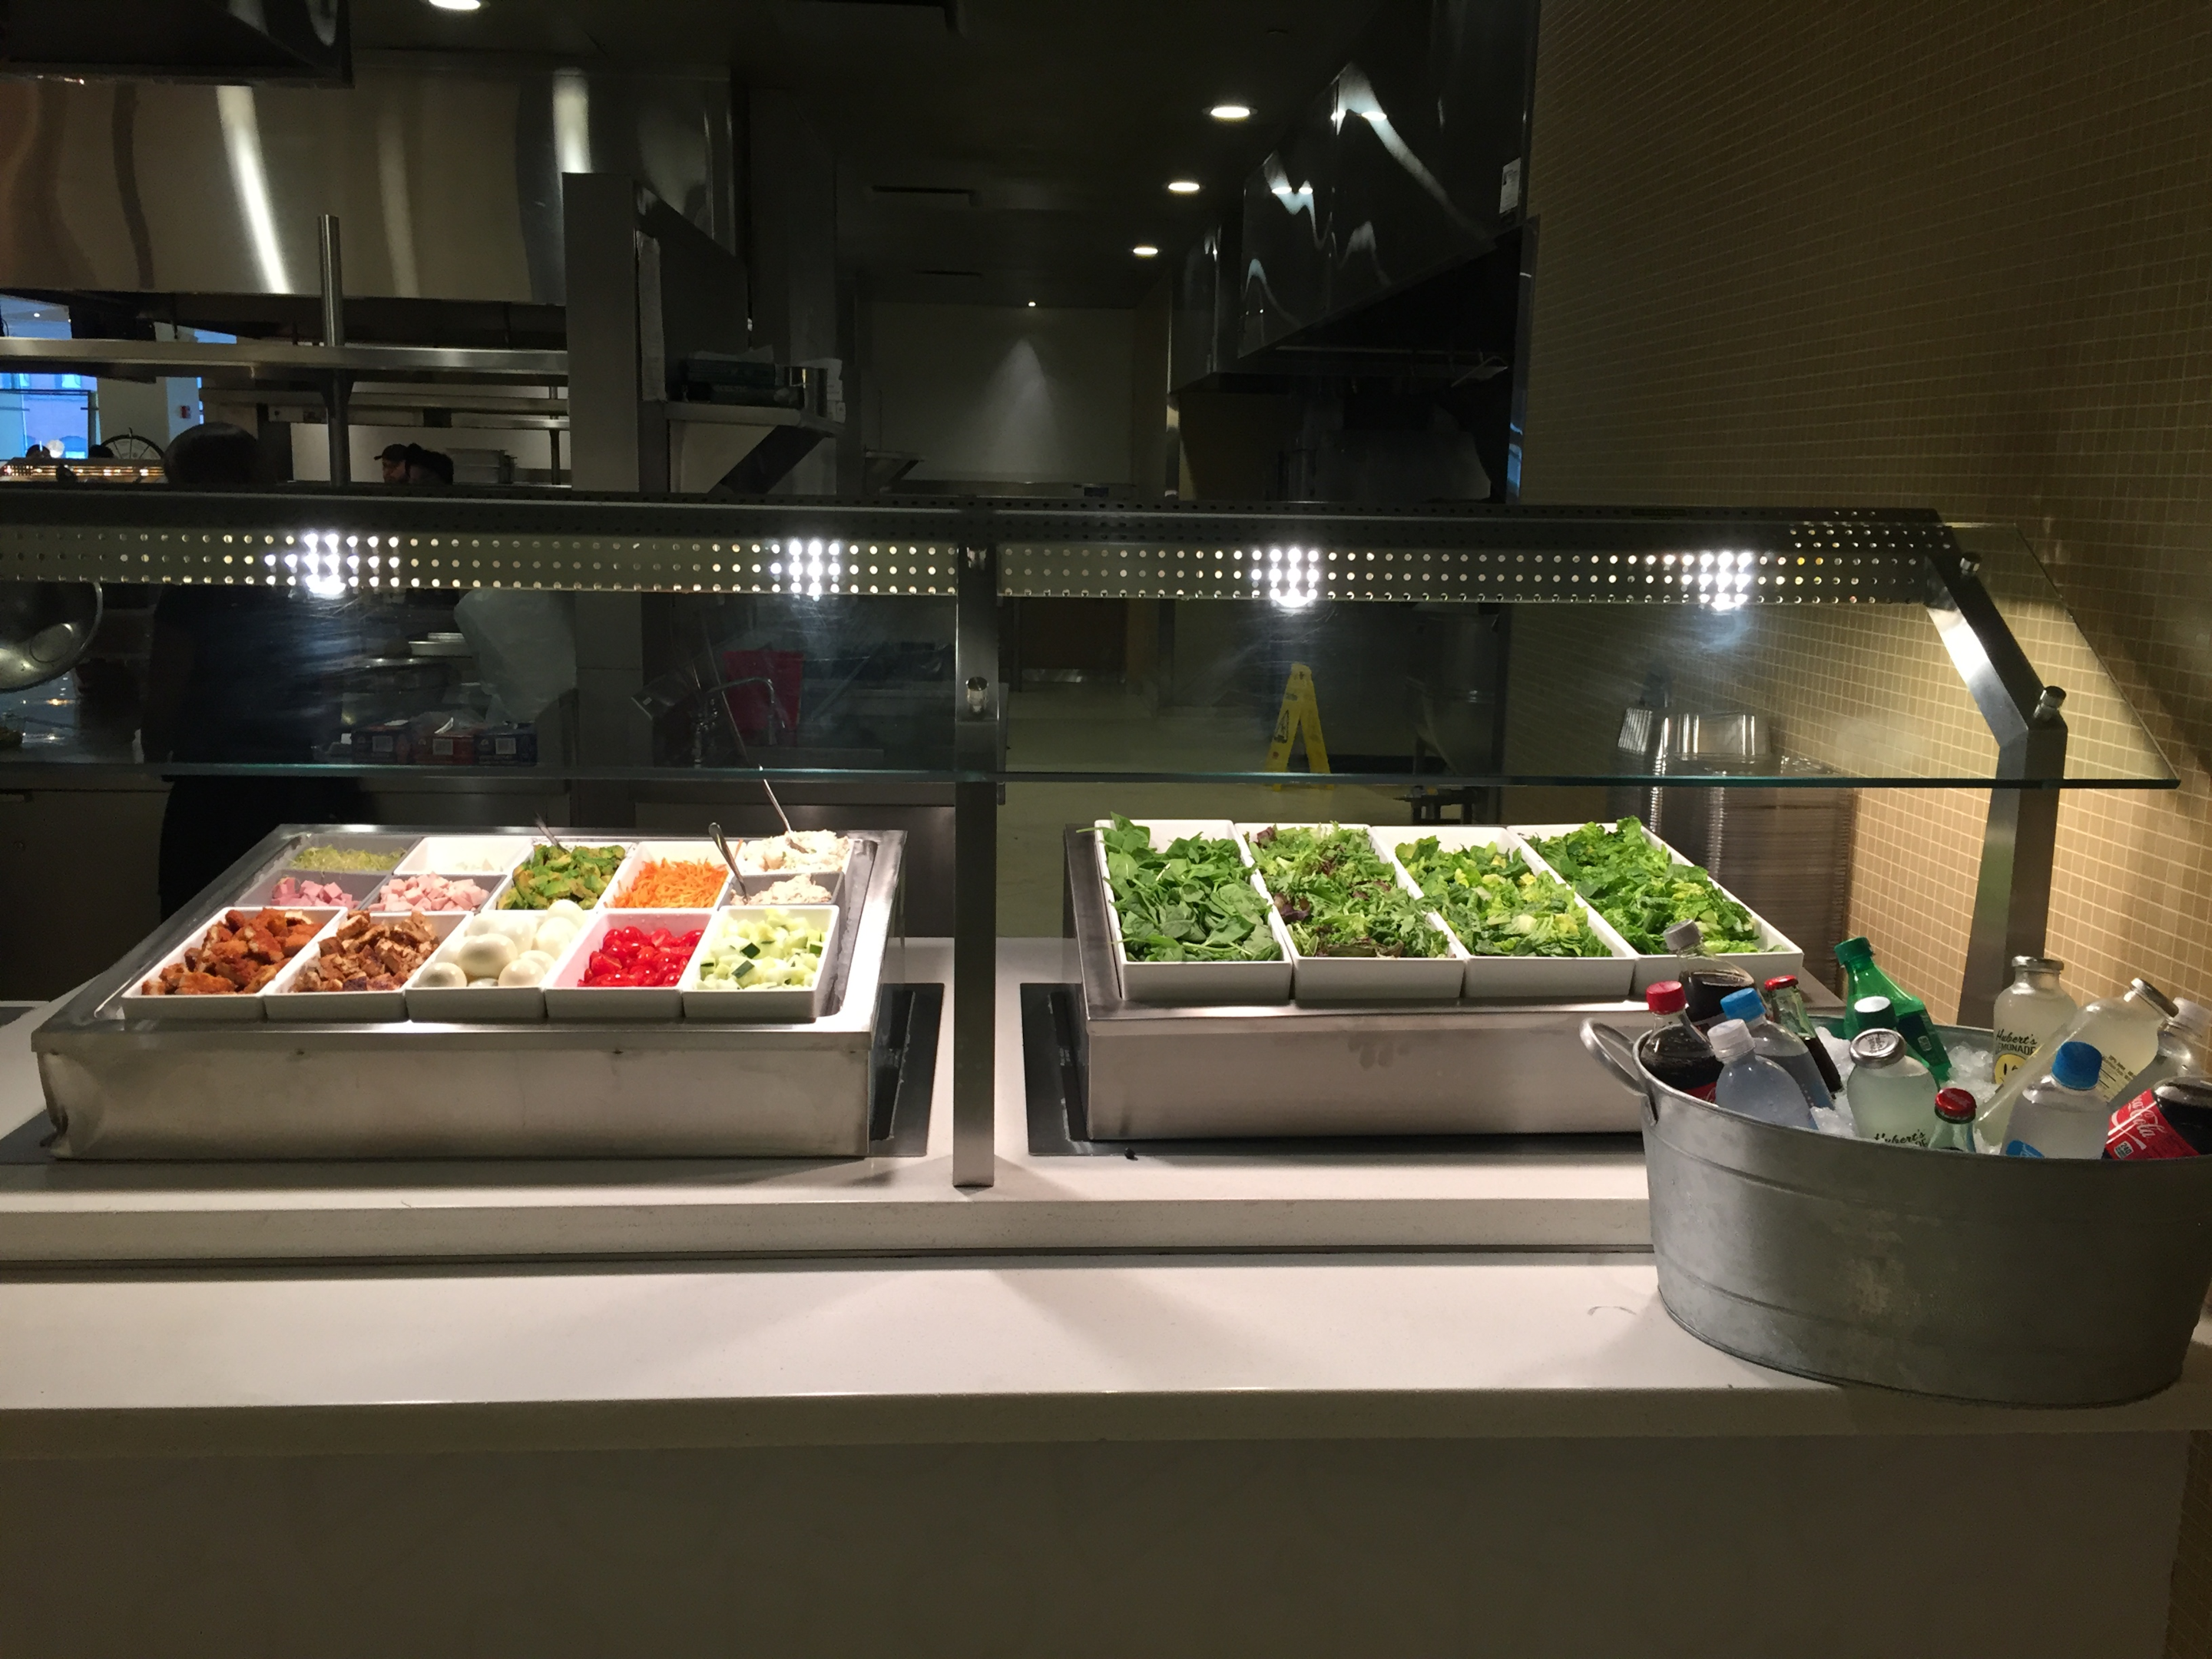 Innovative technology tools used in healthcare food service